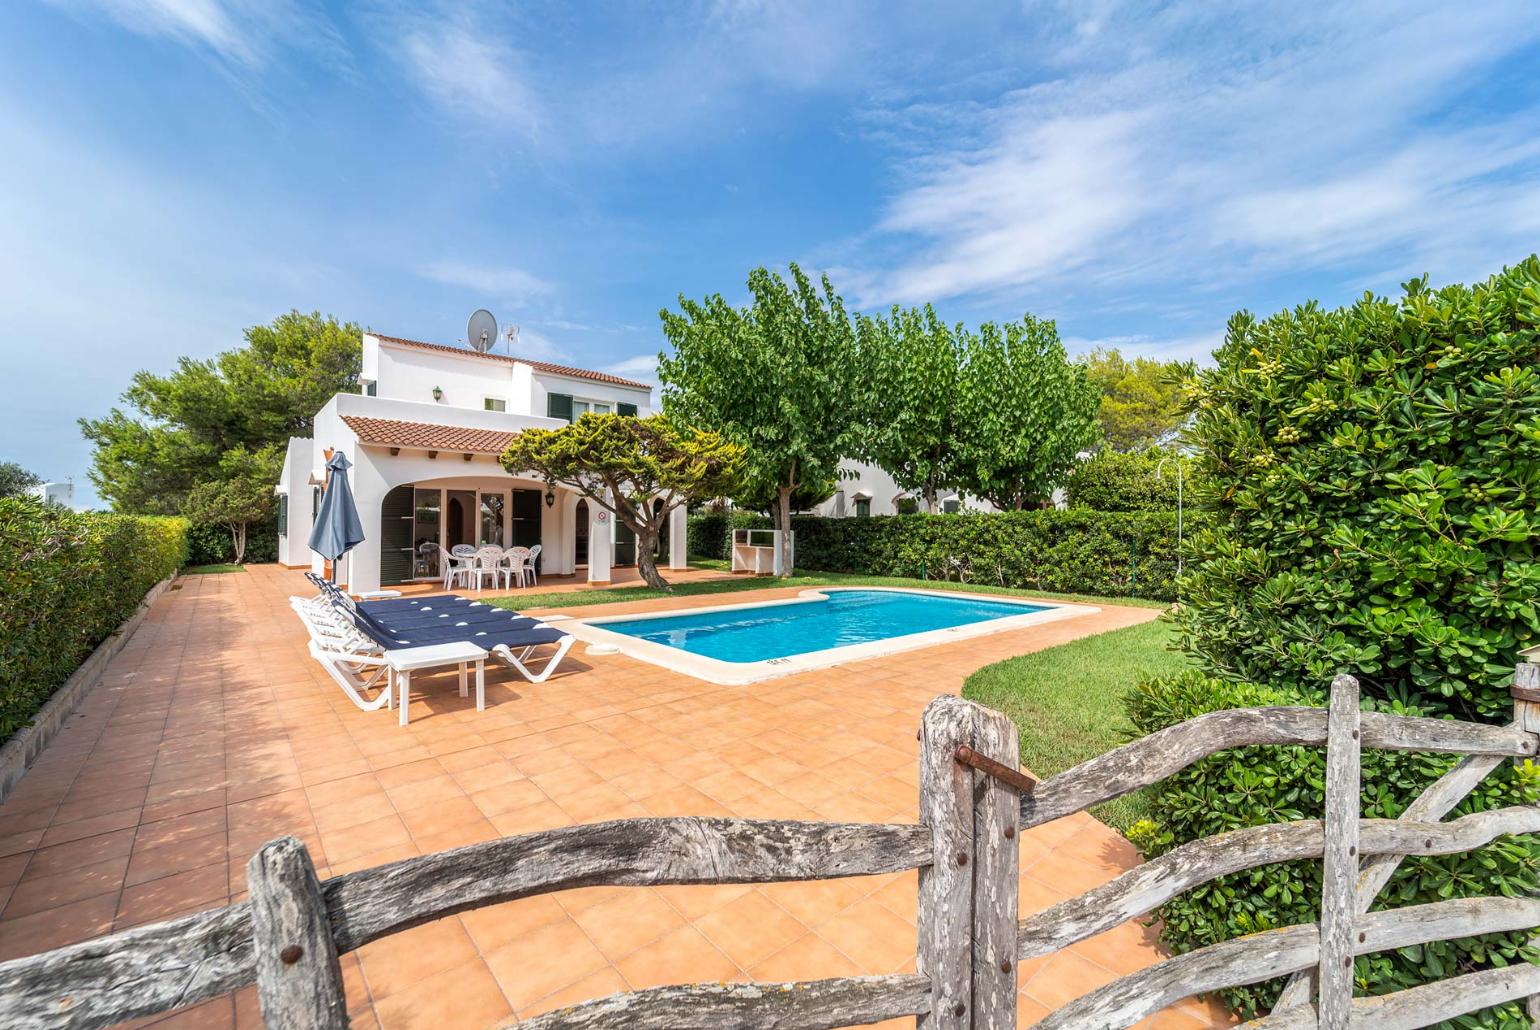 Beautiful villa with private pool and terrace.